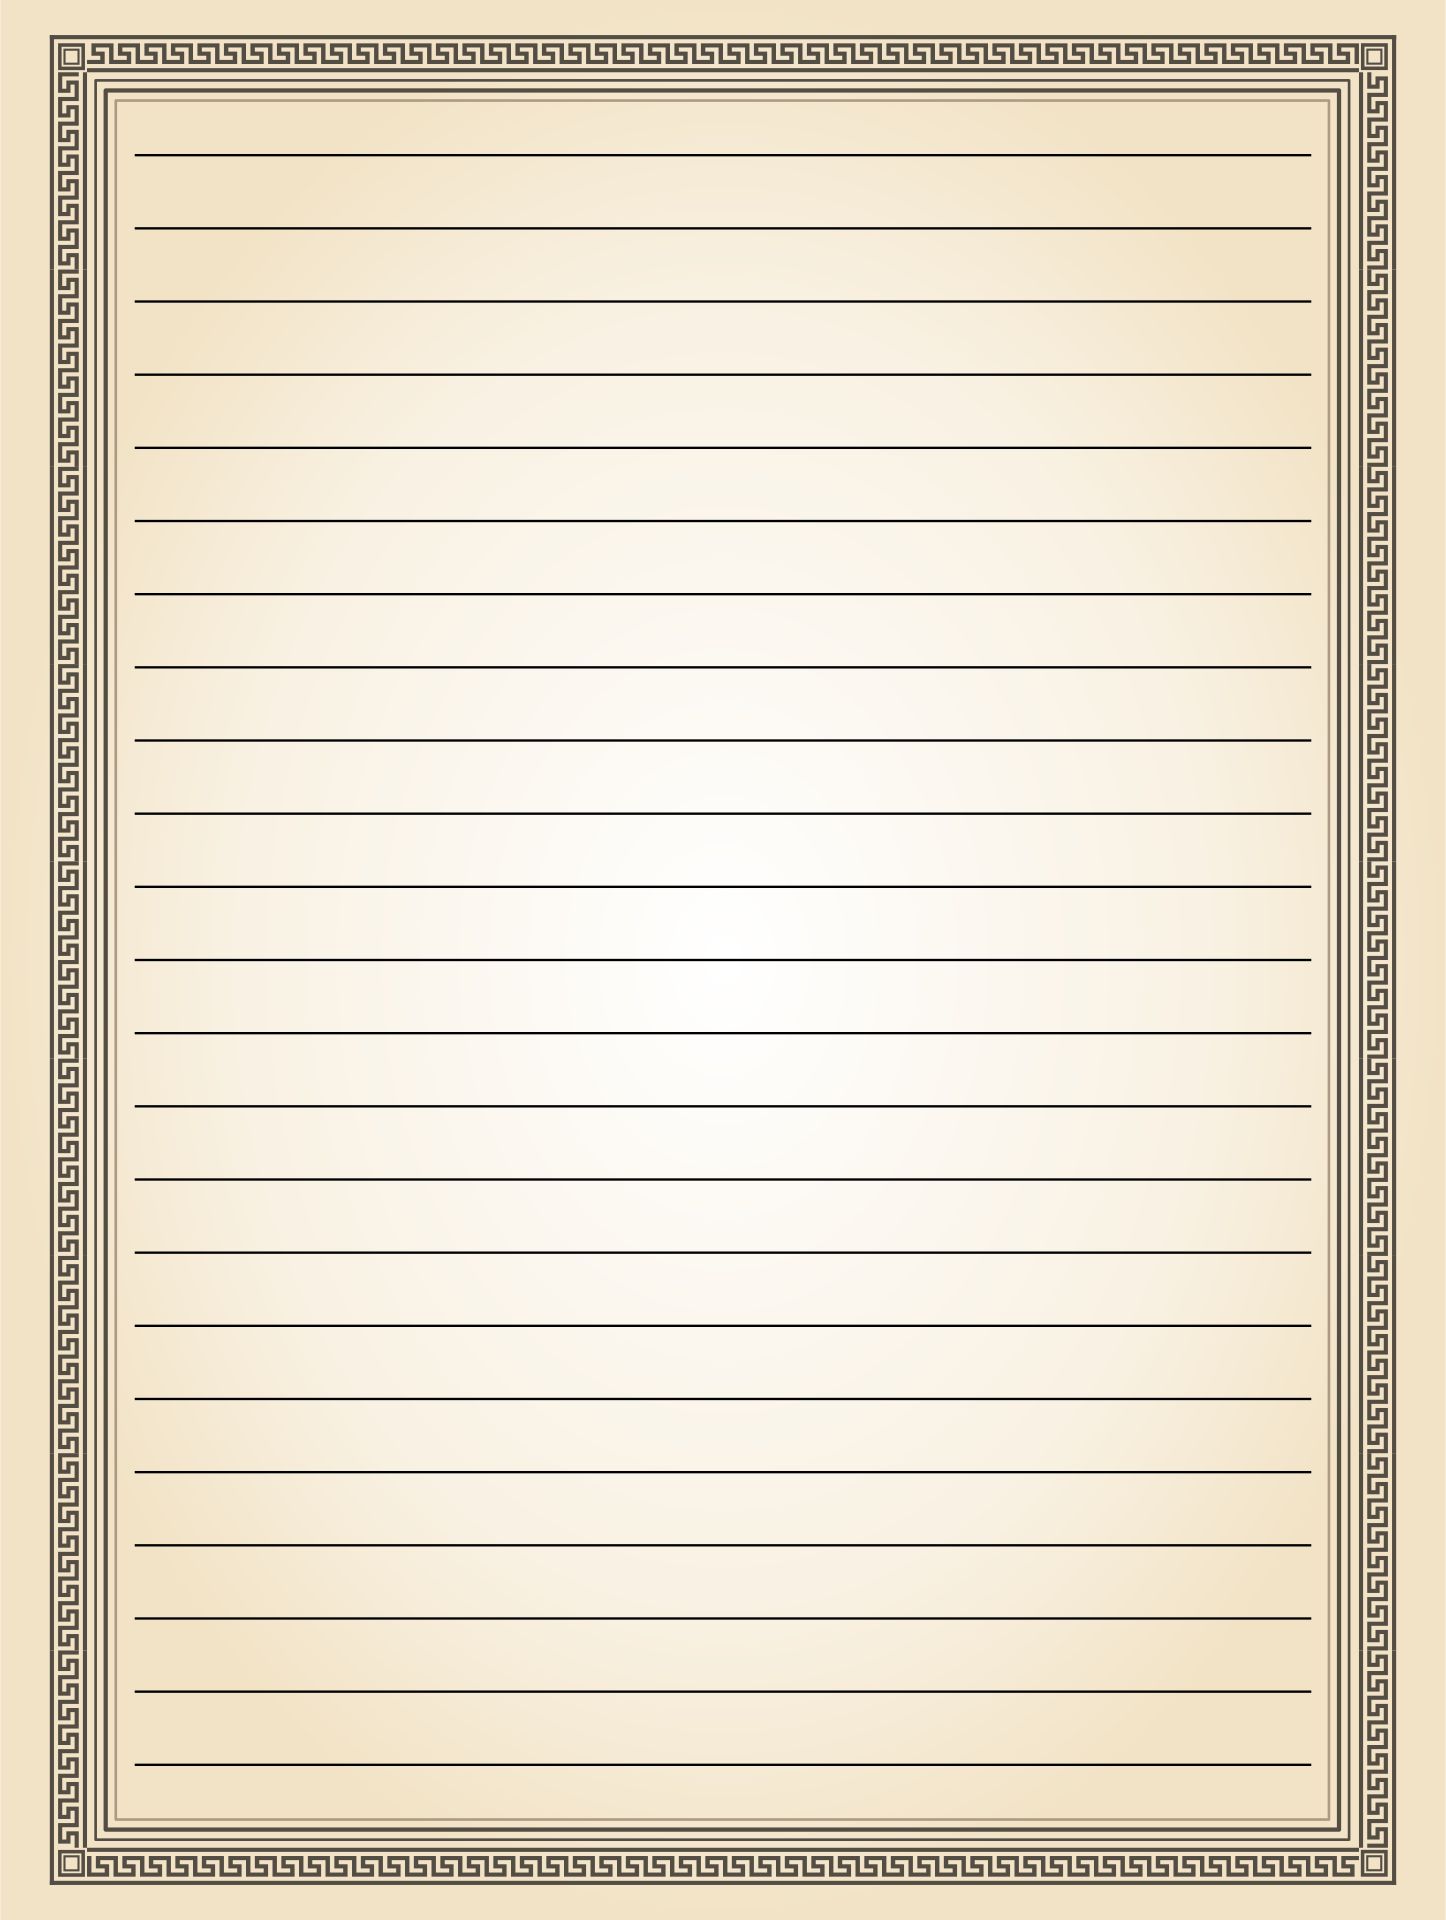 printable-lined-paper-with-border-printable-world-holiday